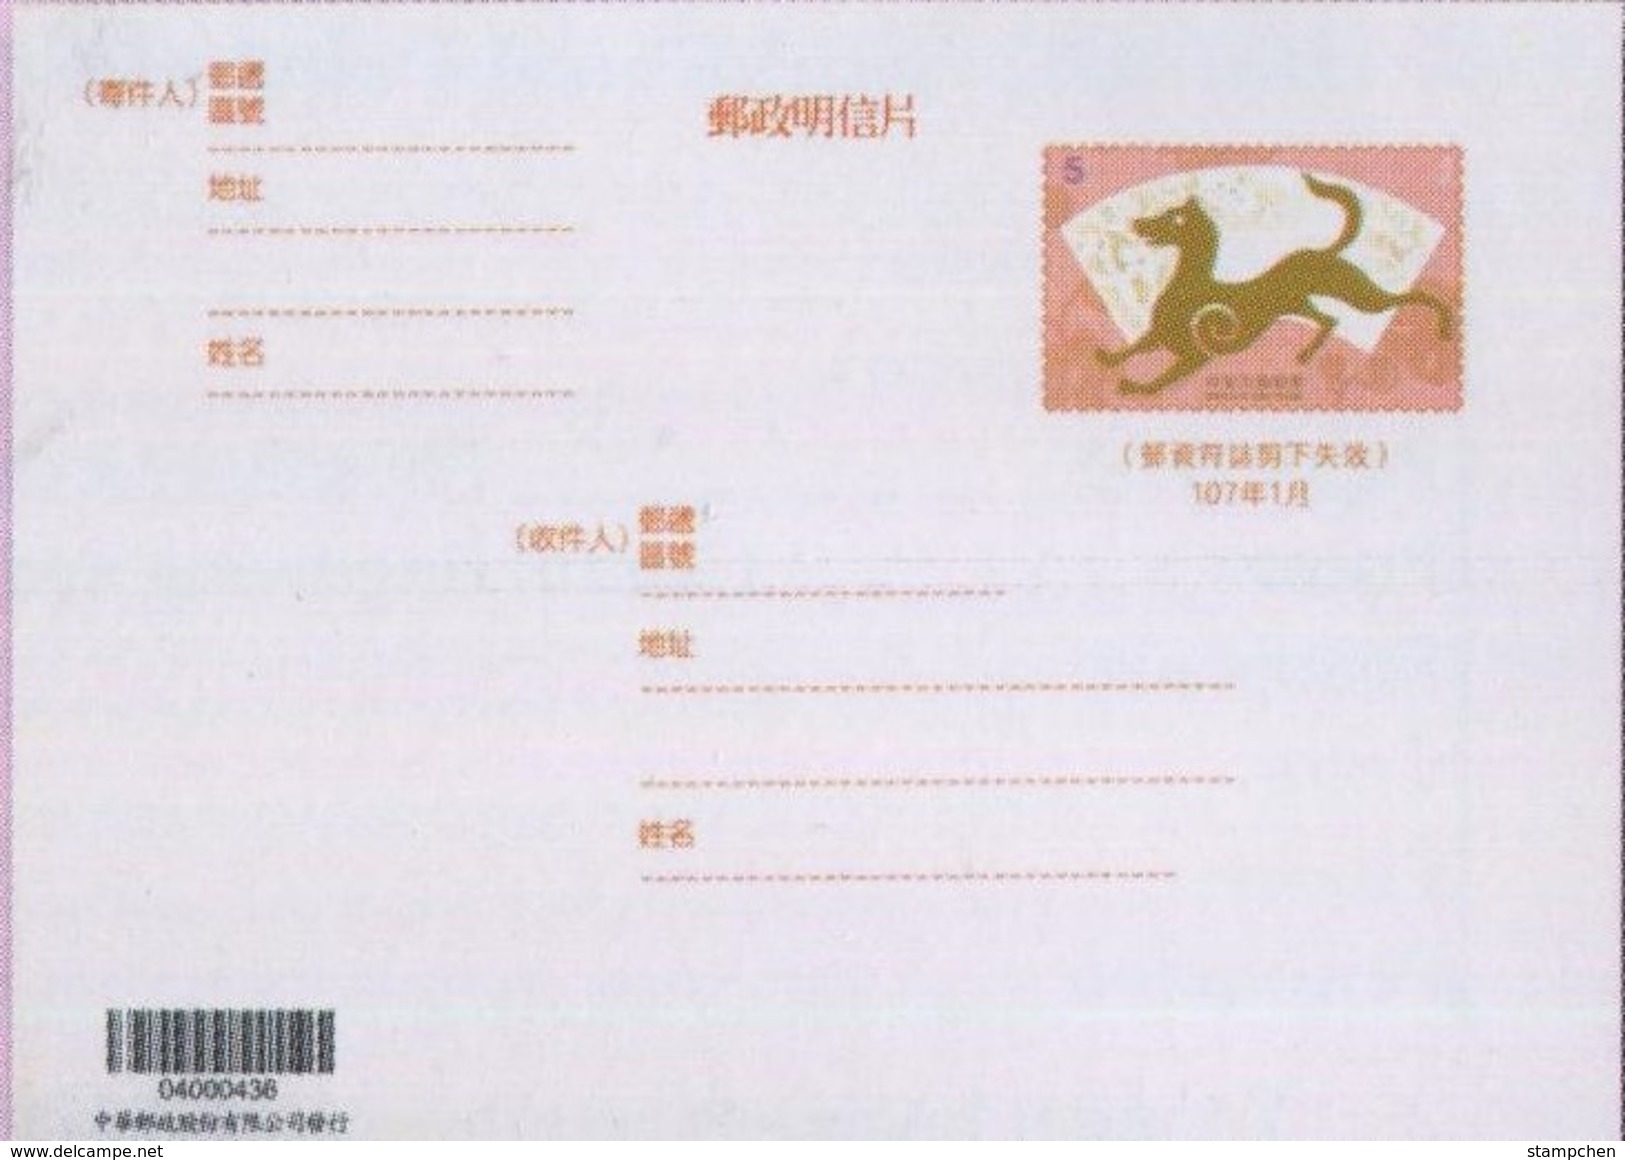 Set 2 Taiwan 2018 Chinese New Year Dog Pre-Stamp Domestic Postal Cards Postal Stationary - Postal Stationery